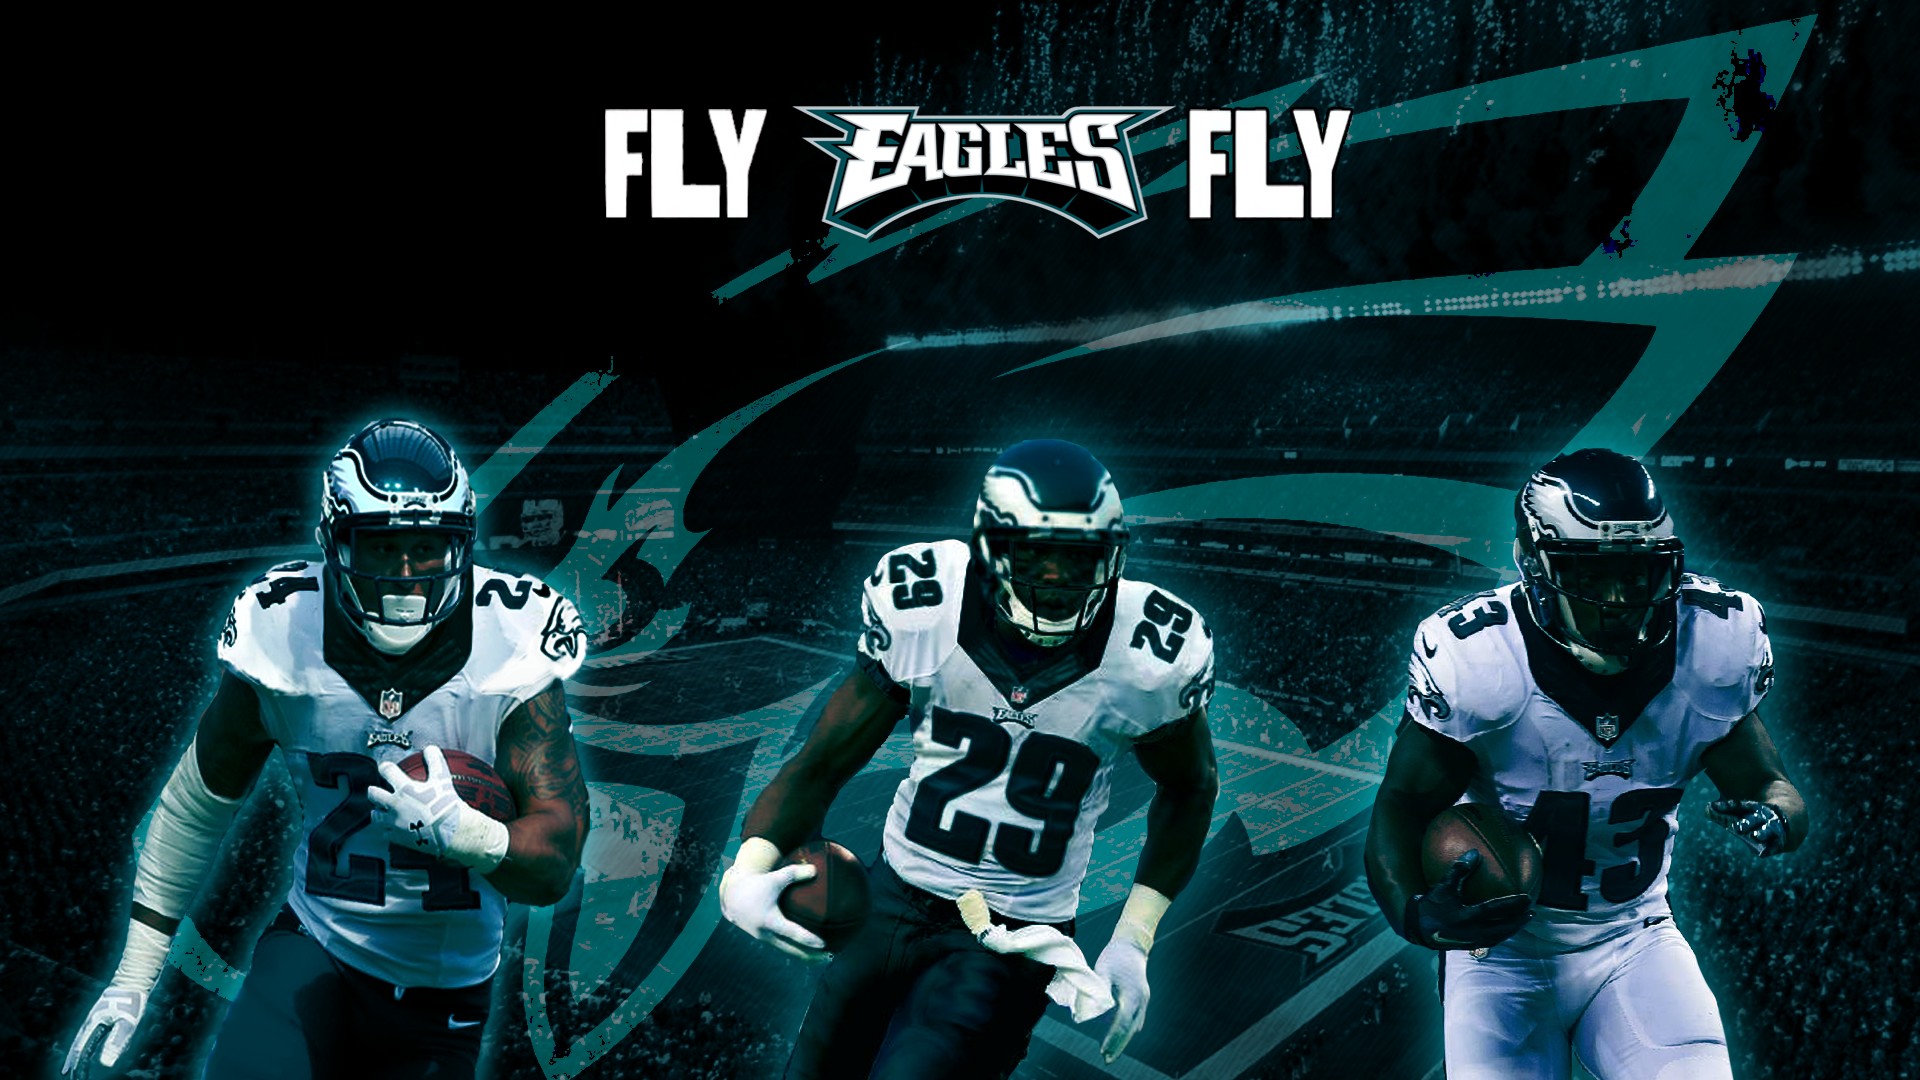 The Eagles Wallpaper For Mac Backgrounds with resolution 1920x1080 pixel. You can make this wallpaper for your Mac or Windows Desktop Background, iPhone, Android or Tablet and another Smartphone device